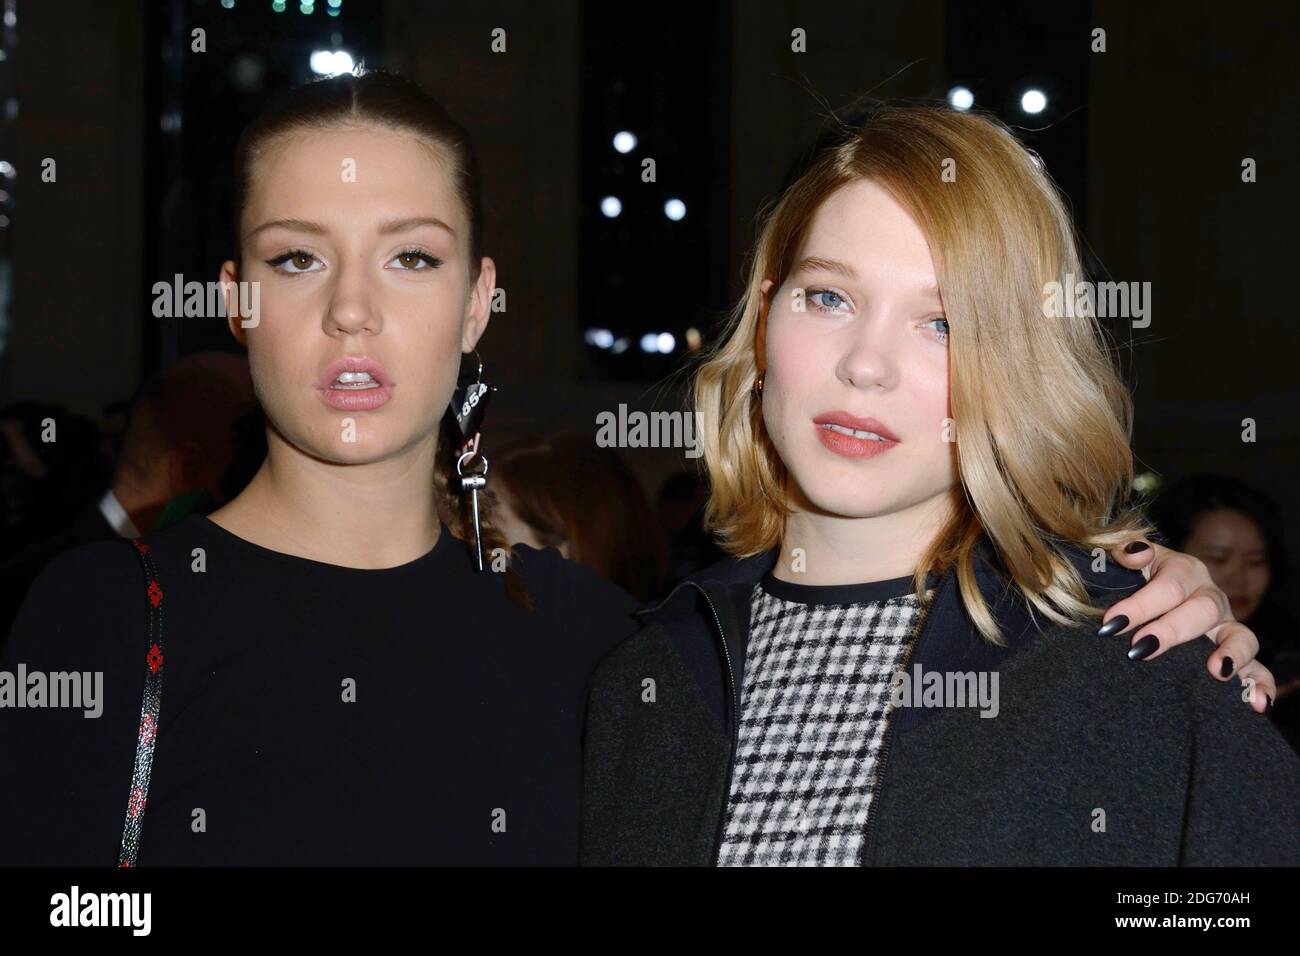 Lea Seydoux and Adele Exarchopoulos (pregnant) attending the Louis Vuitton  show during Paris Fashion Week Ready to wear FallWinter 2017-18 on March  07, 2017 at the Louvre museum in Paris, France. Photo